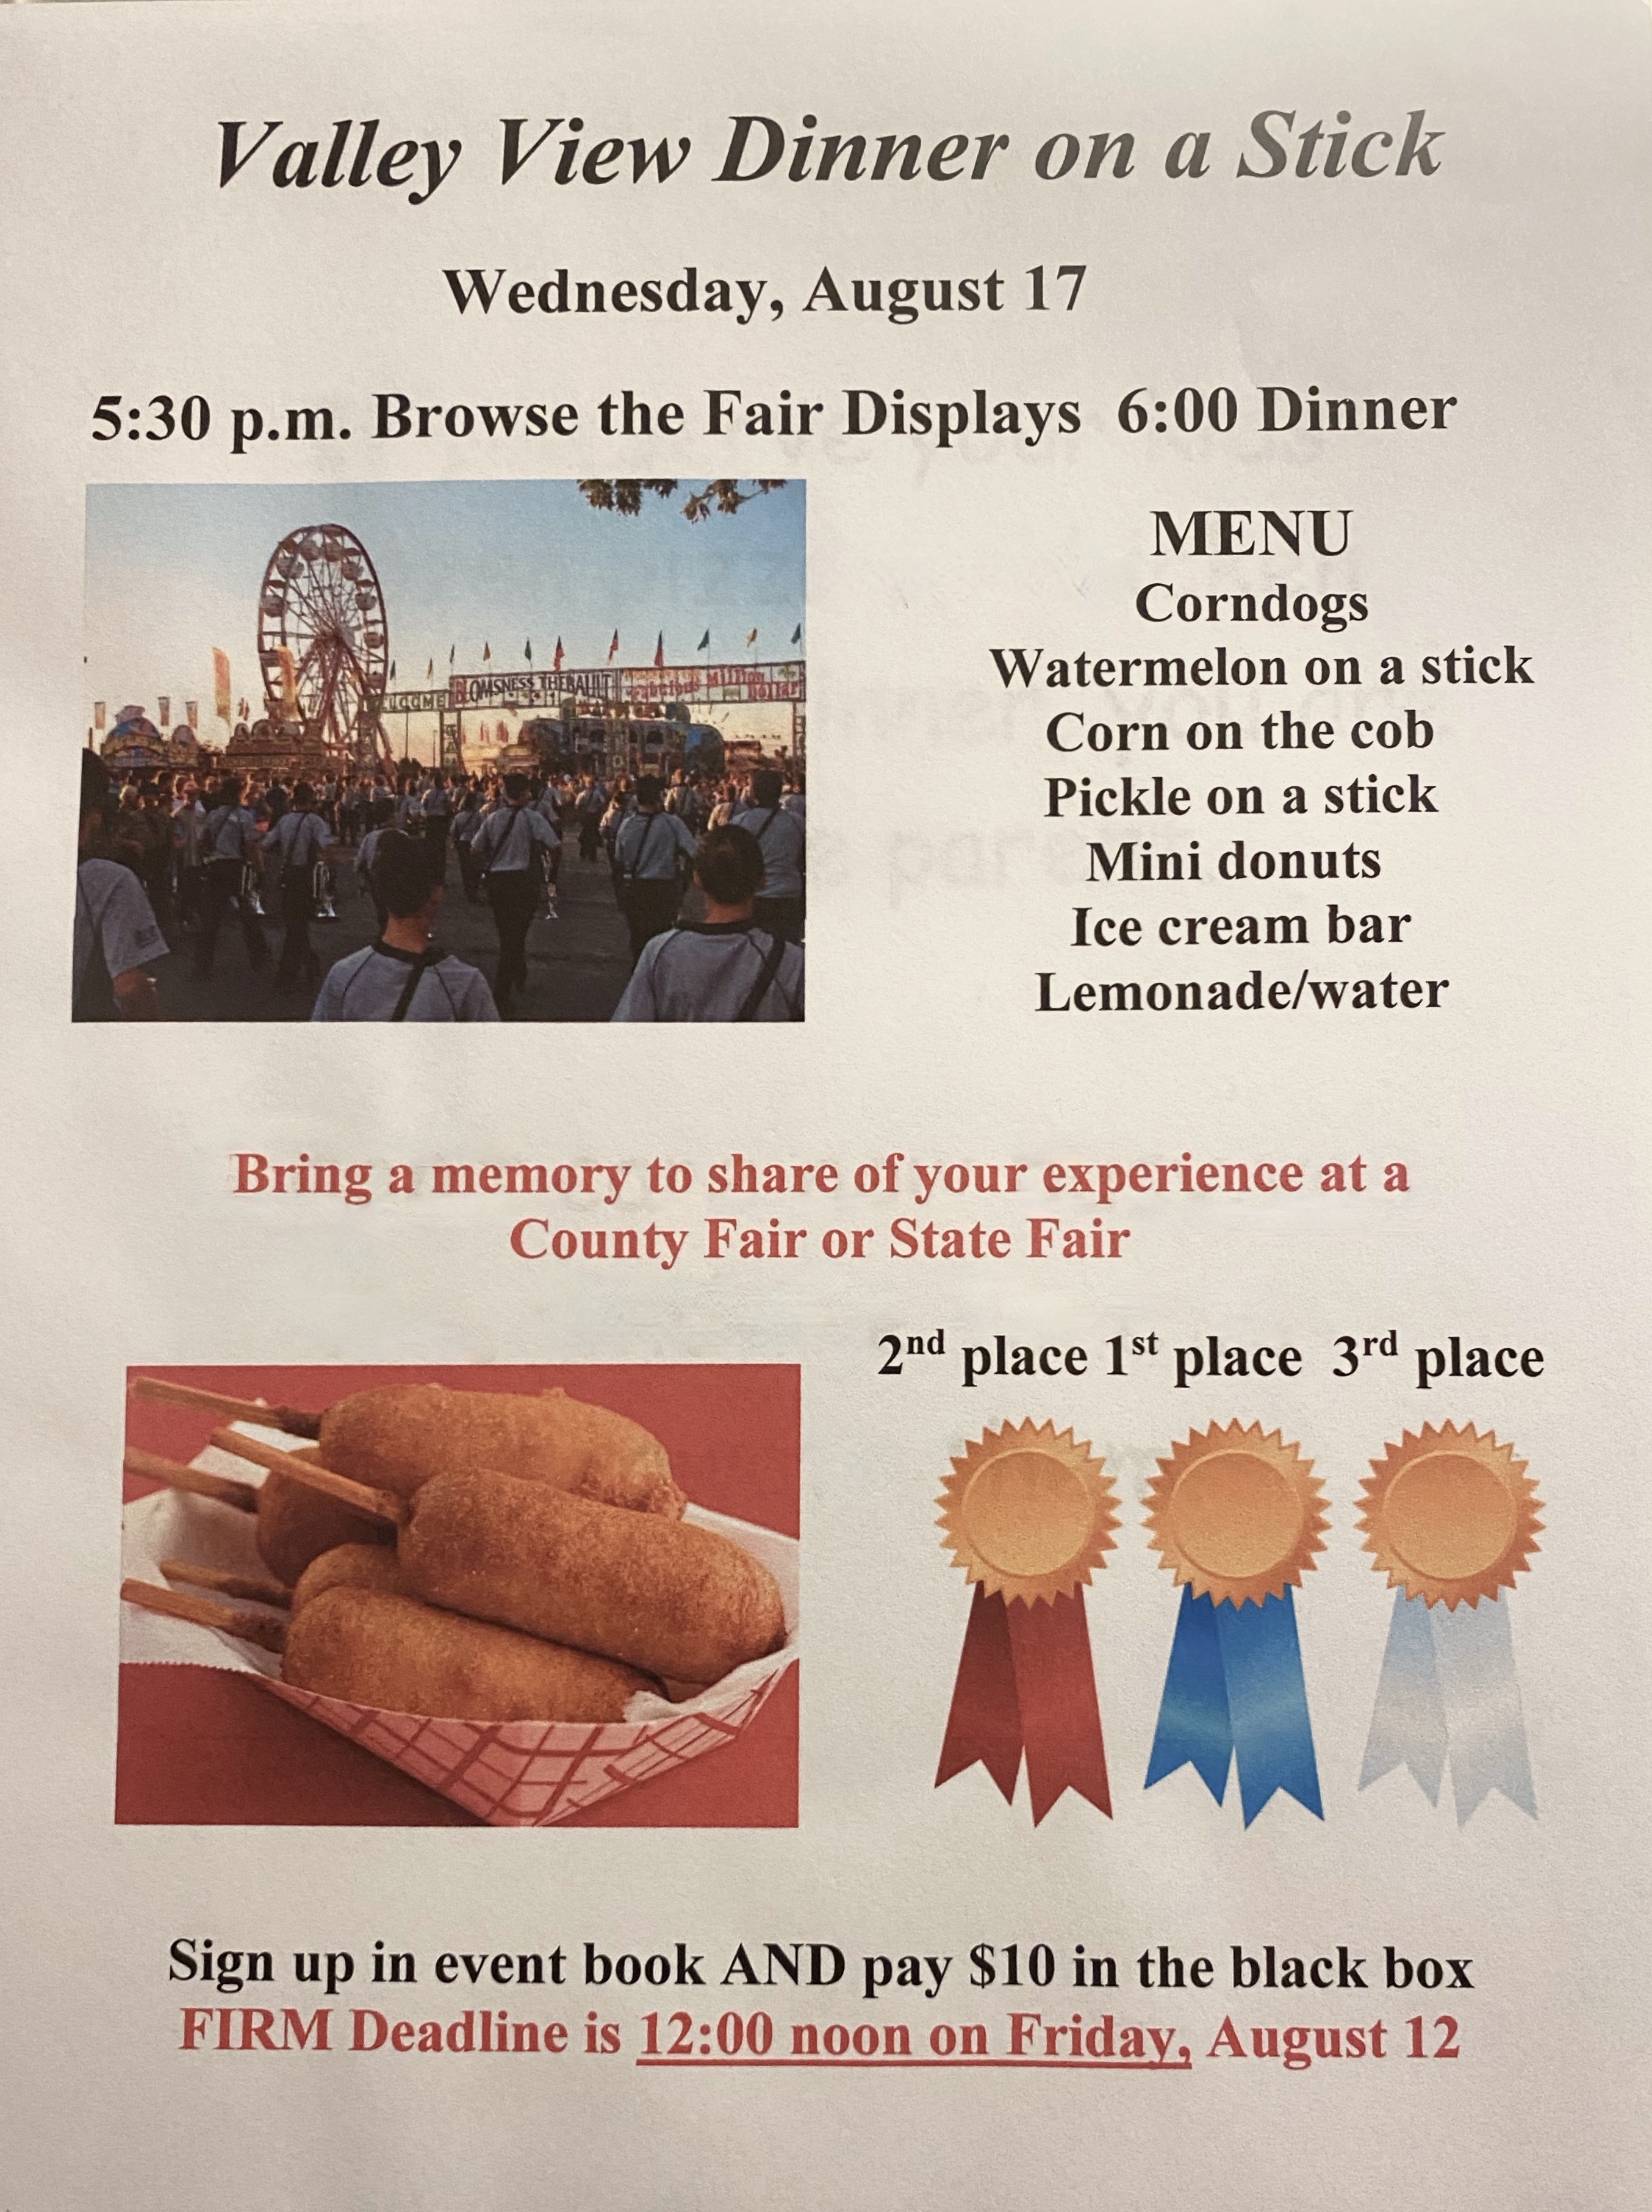 Valley View Dinner on a Stick Event